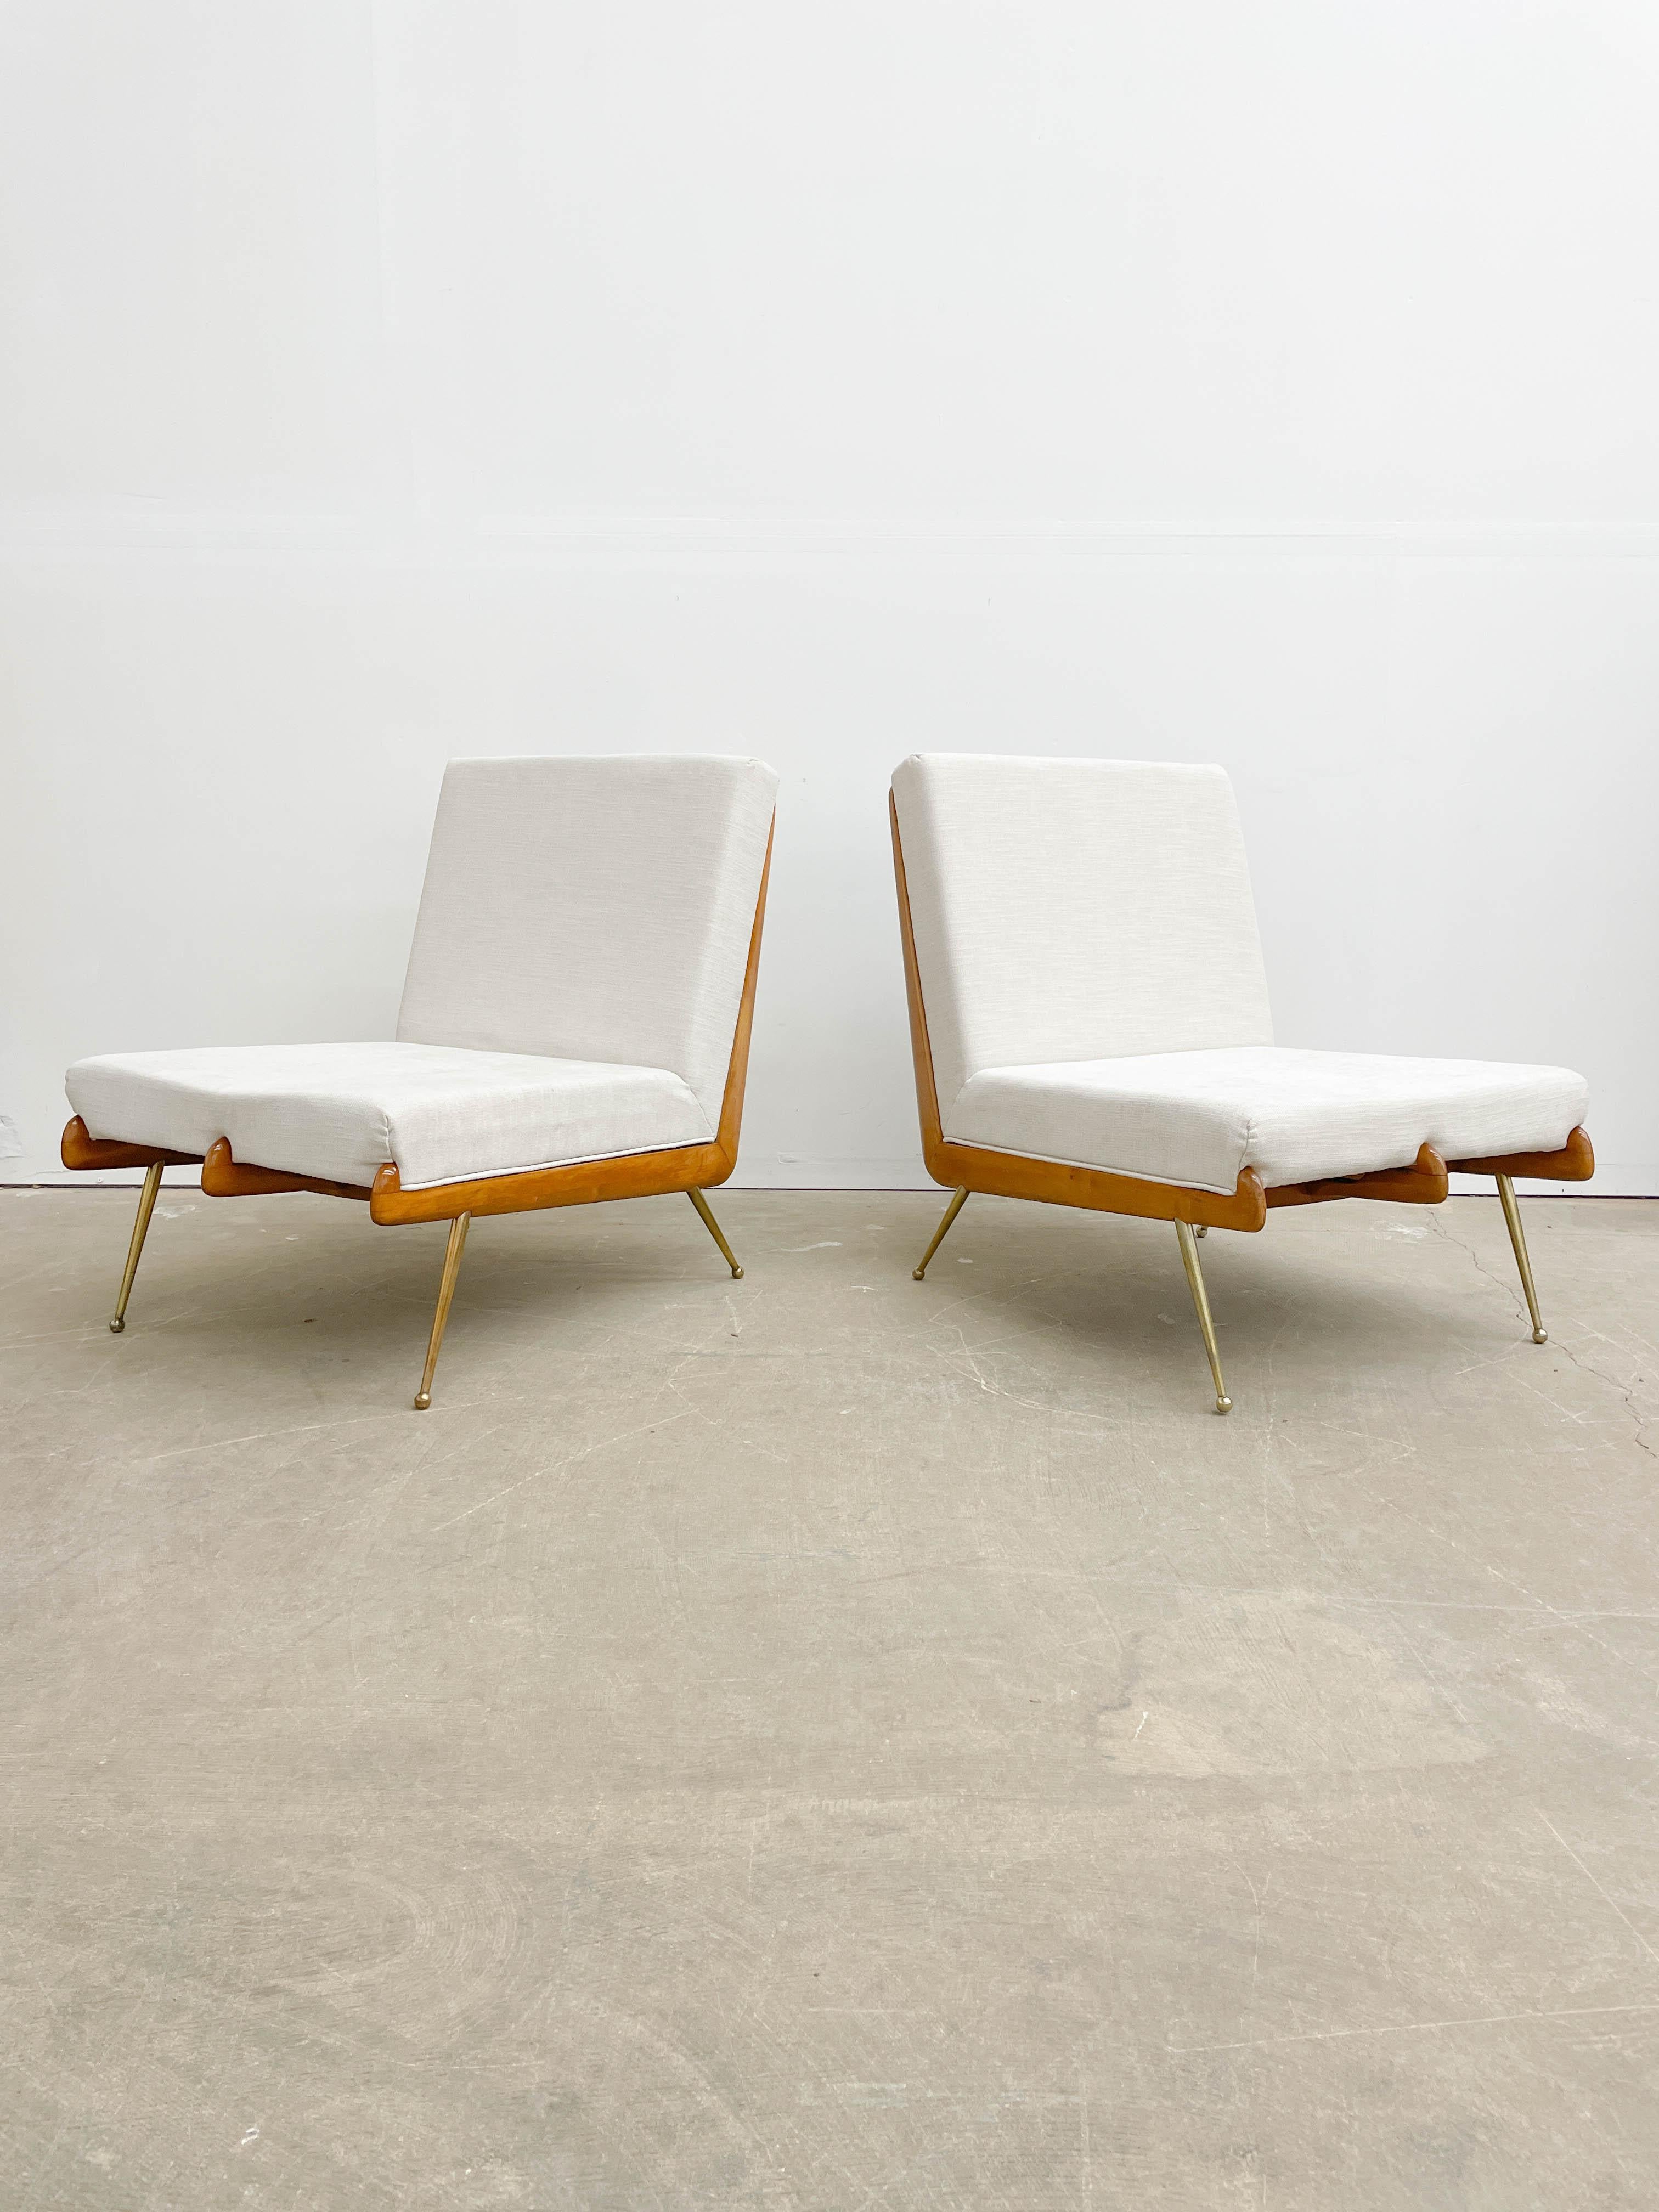 A rare pair of boomerang framed mid century modern slipper chairs made by Artcraft / Robinson-Johnson in the mid 1950s. These striking chairs (Model N71) were produced as part of a line called Njordkyn and referenced the sleek Norwegian and Swedish